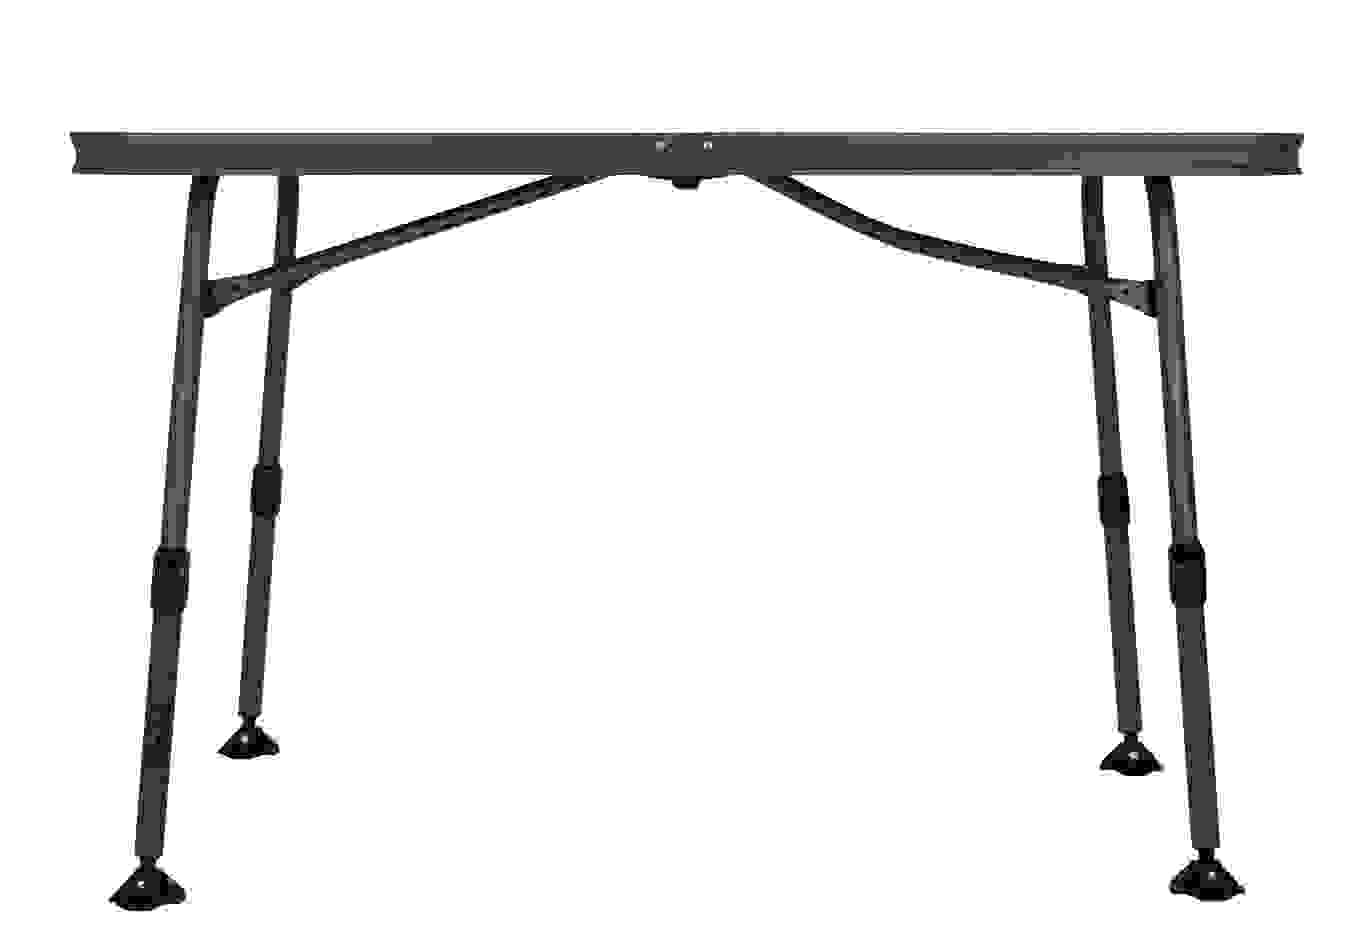 xxl-session-table_main_side-extended-legsgif